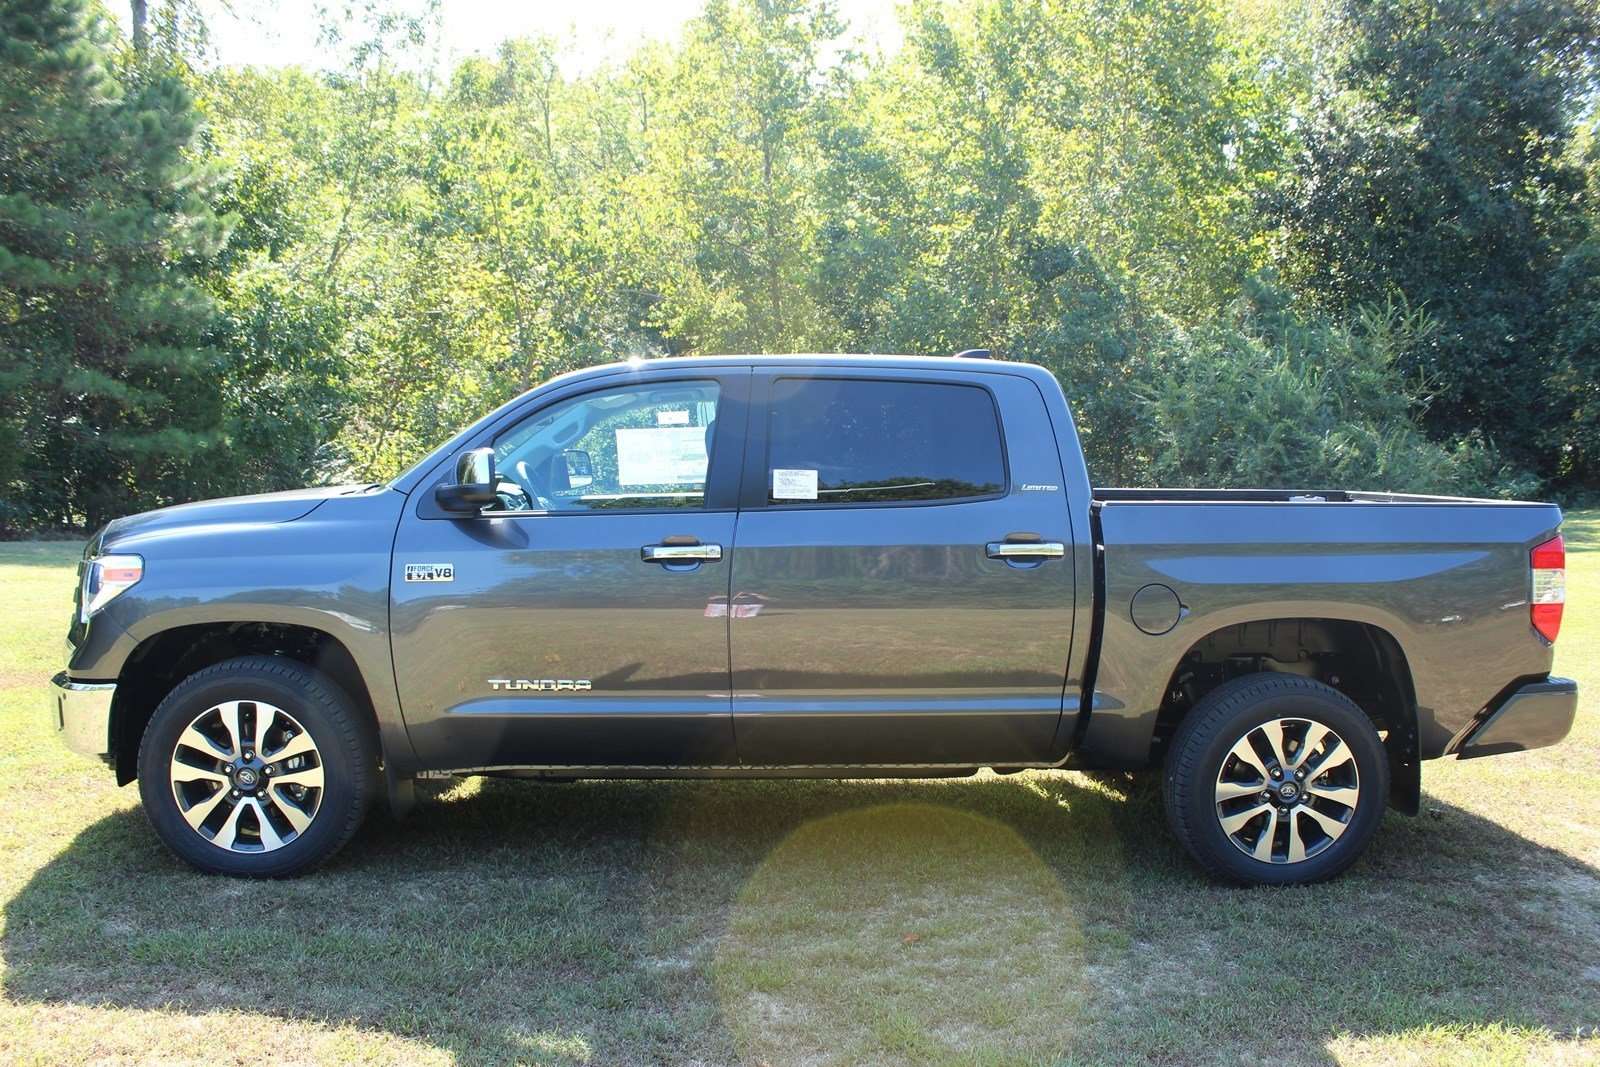 New 2020 Toyota Tundra 4WD Limited Crew Cab Pickup in Gloucester #9075